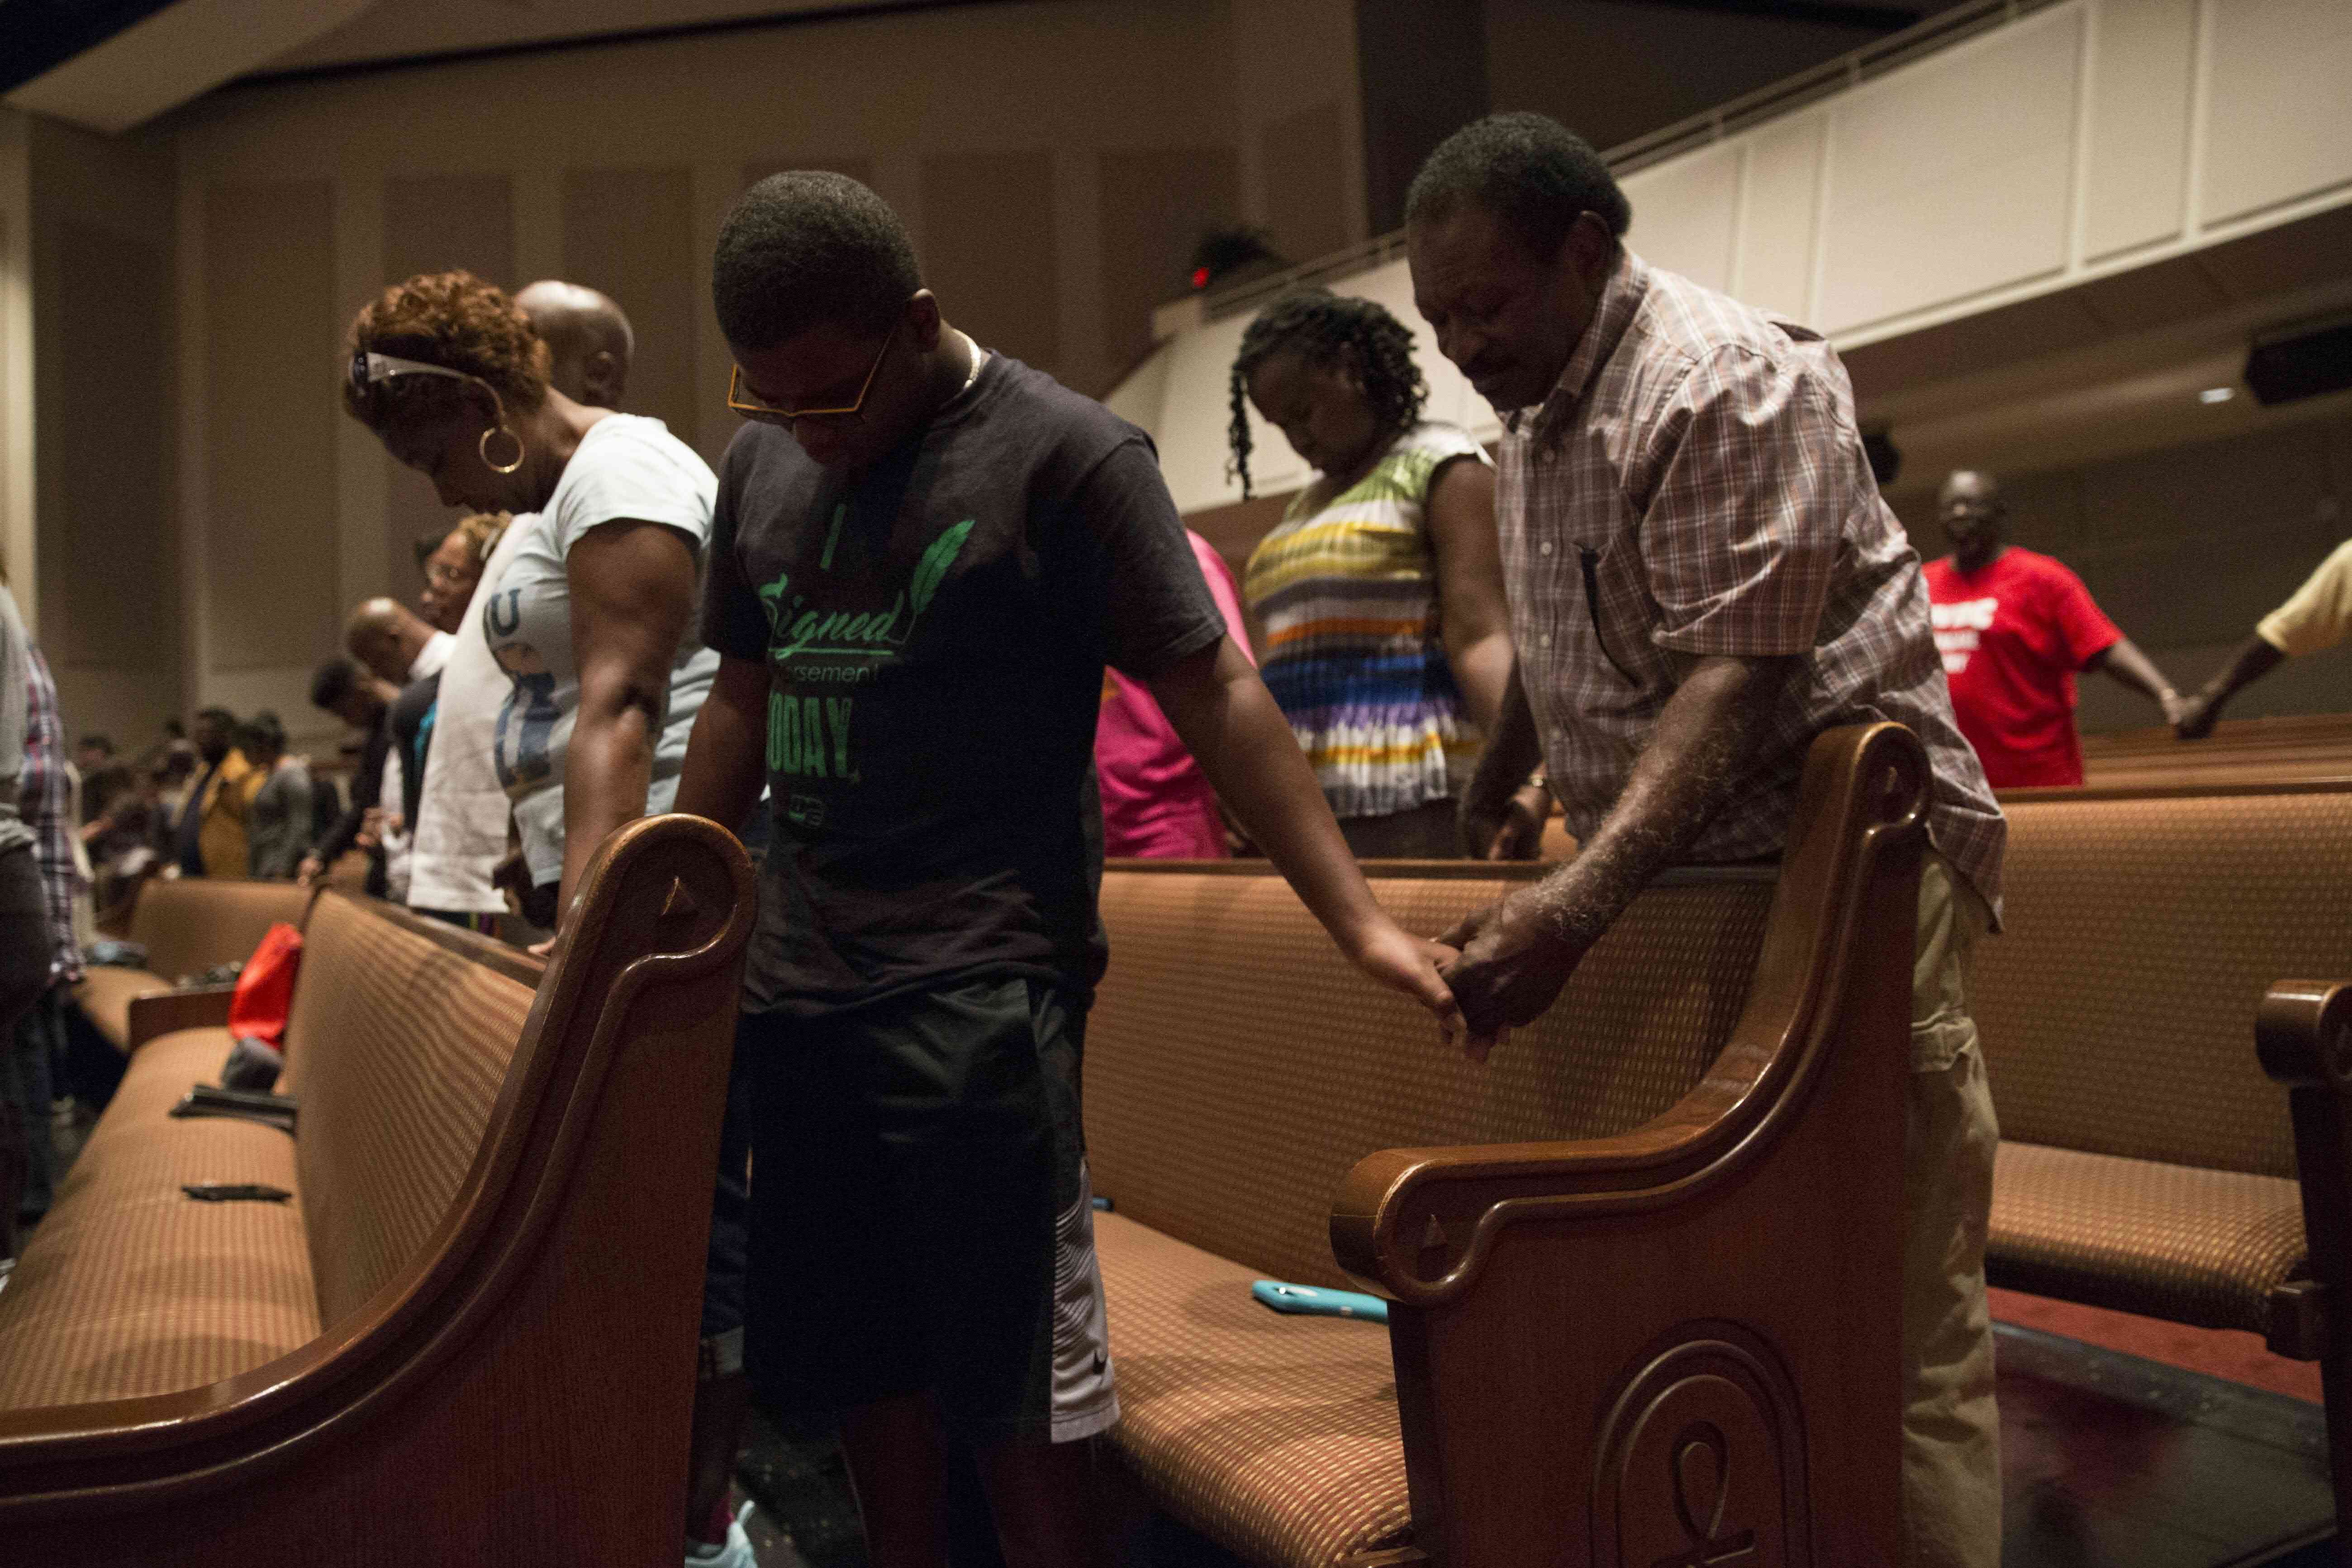 Parishioners of Frienship-West Baptist Church in Dallas pray together on July 10, 2016, during a "Community Conversation" event following the recent sniper attacks against white police officers. (Photo by Laura Buckman/AFP/Getty Images)